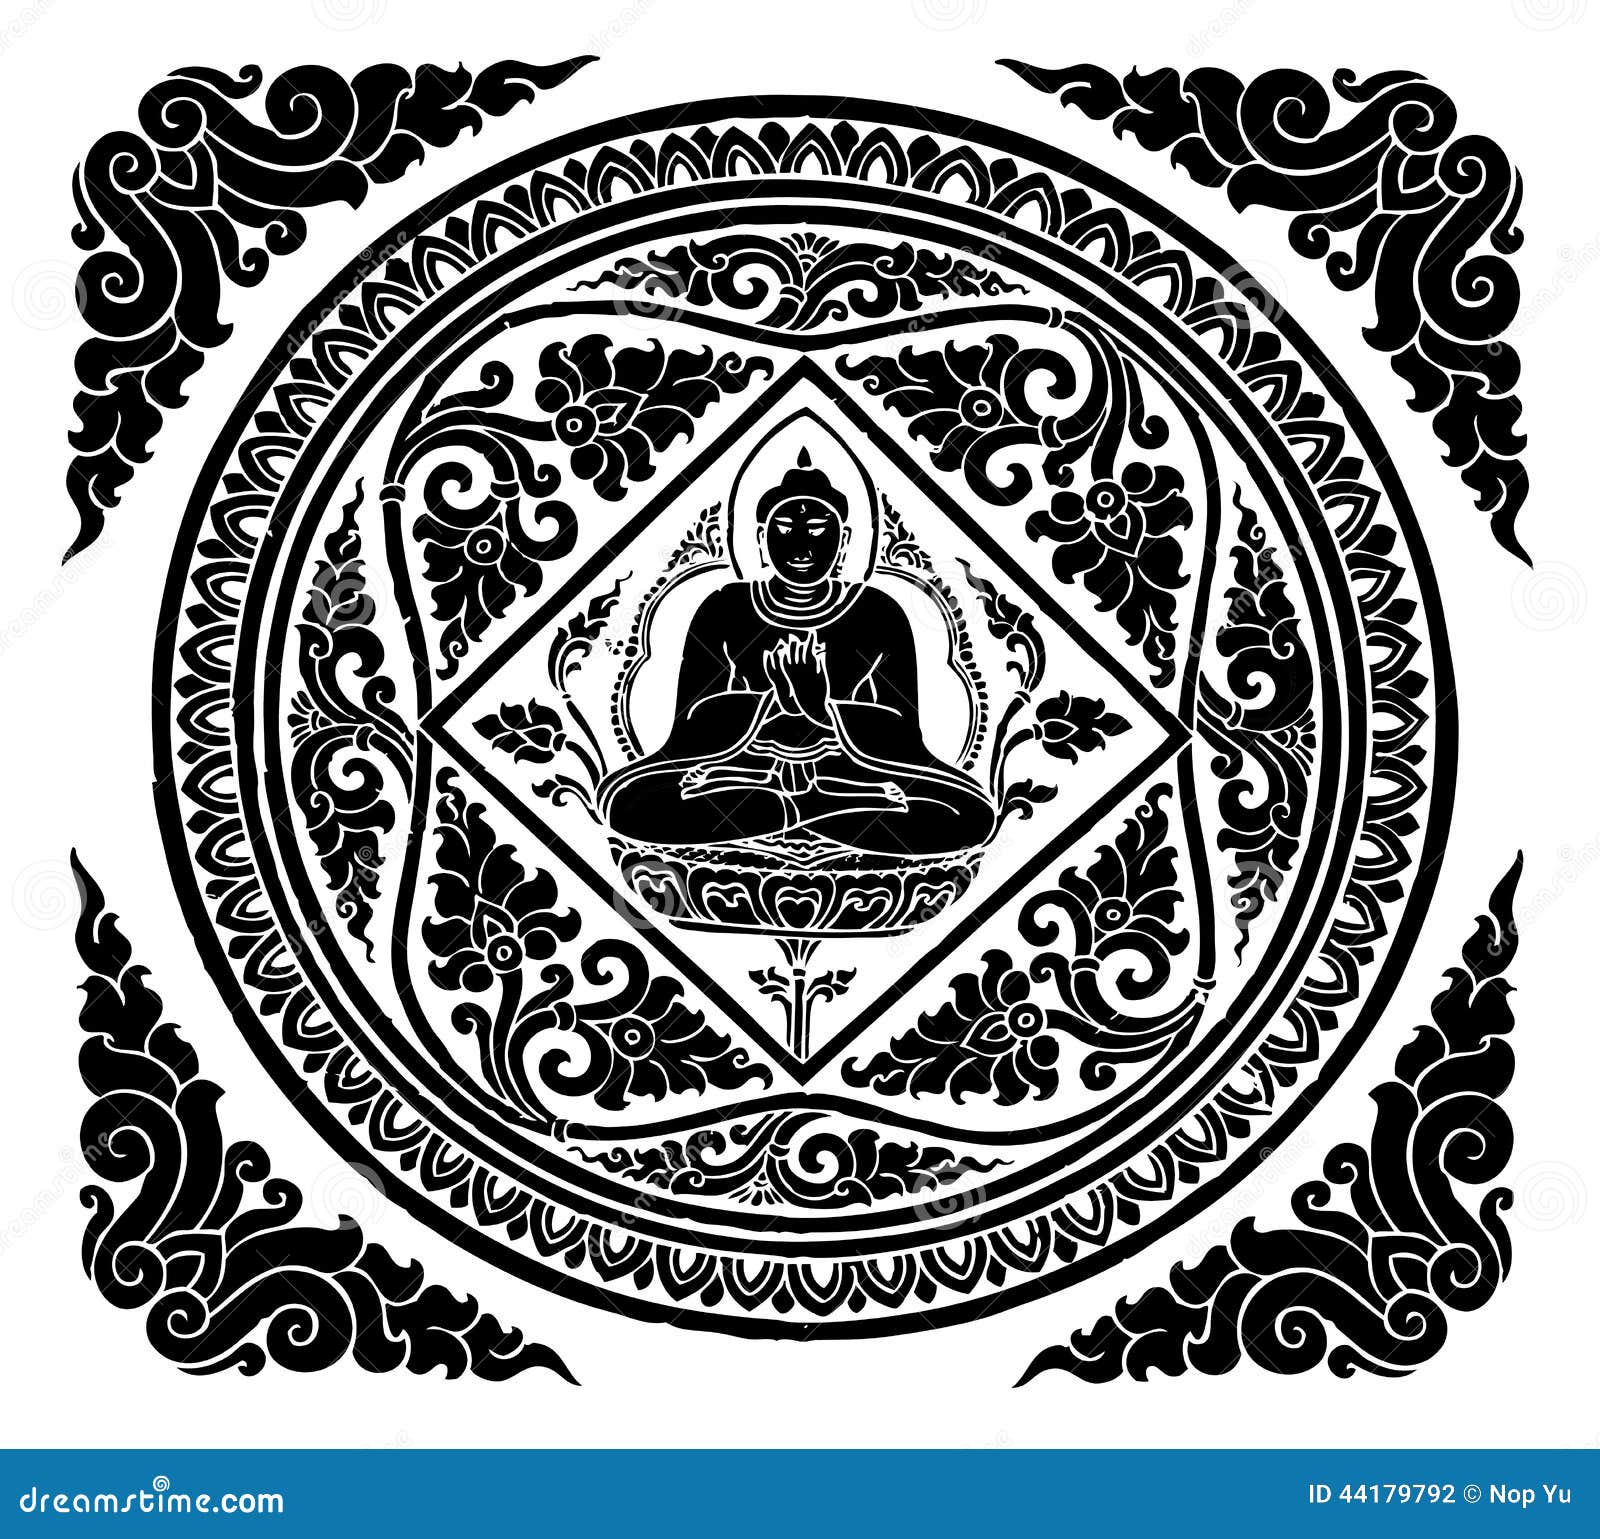 Buddha, silhouette, vector, shadow, black, buddhism, meditate. Sitting  meditating buddha silhouette vector in black. | CanStock